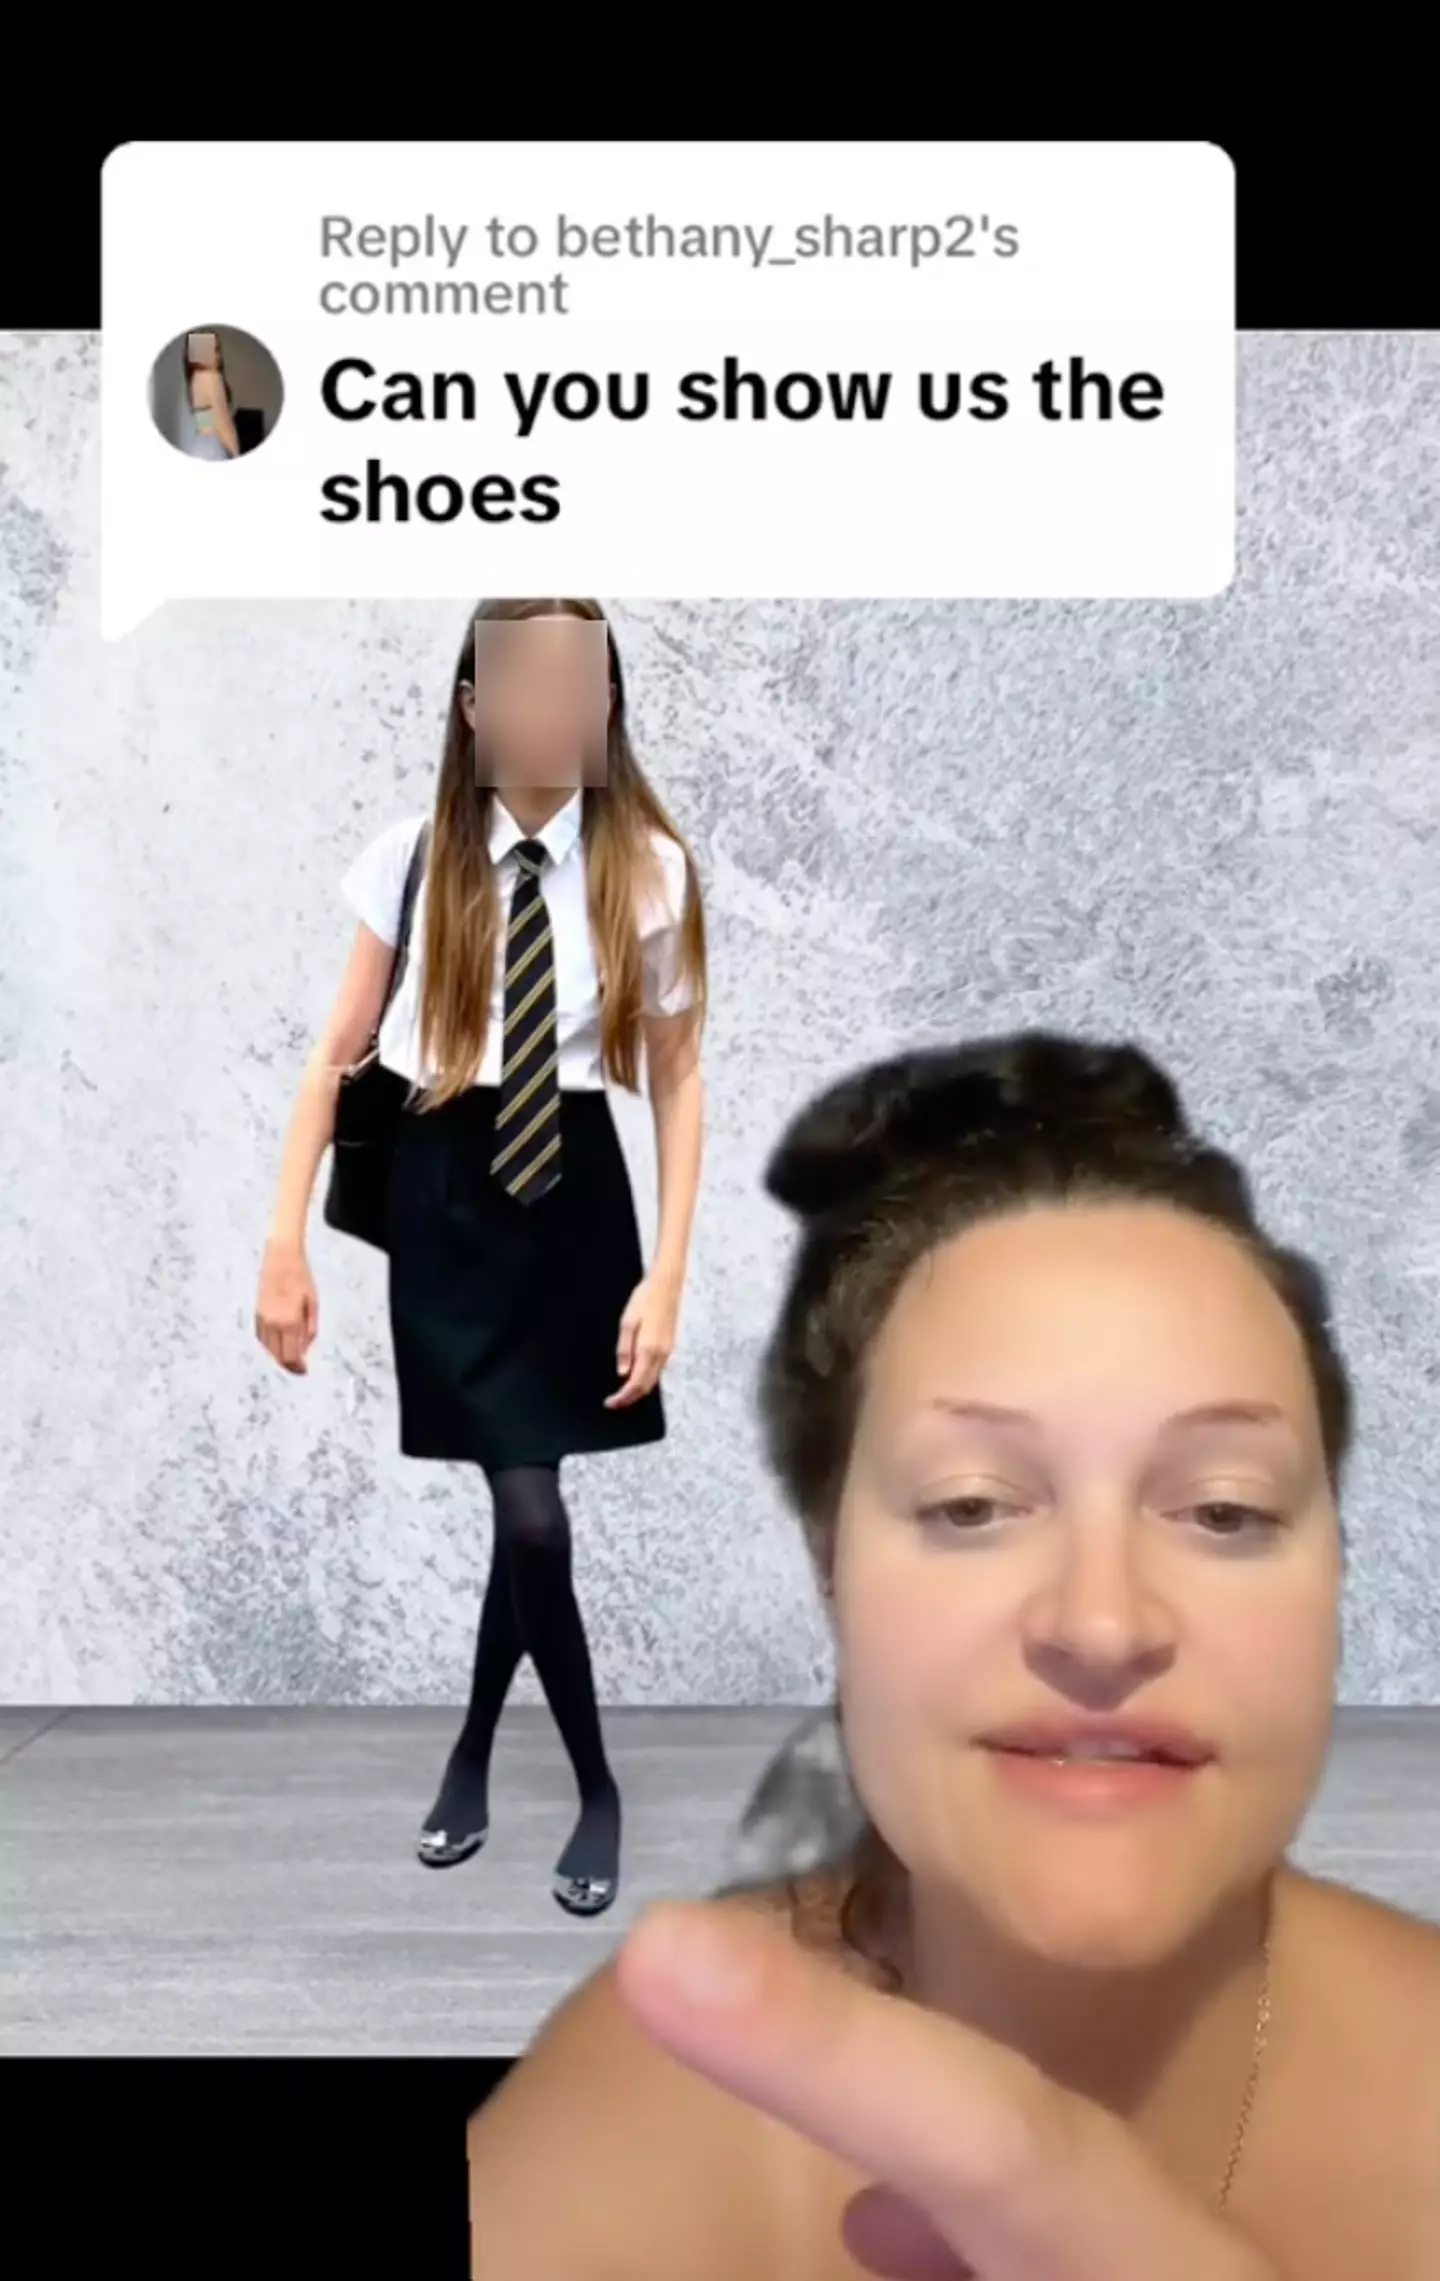 The Yorkshire mum showed people what her daughter's shoes looked like.